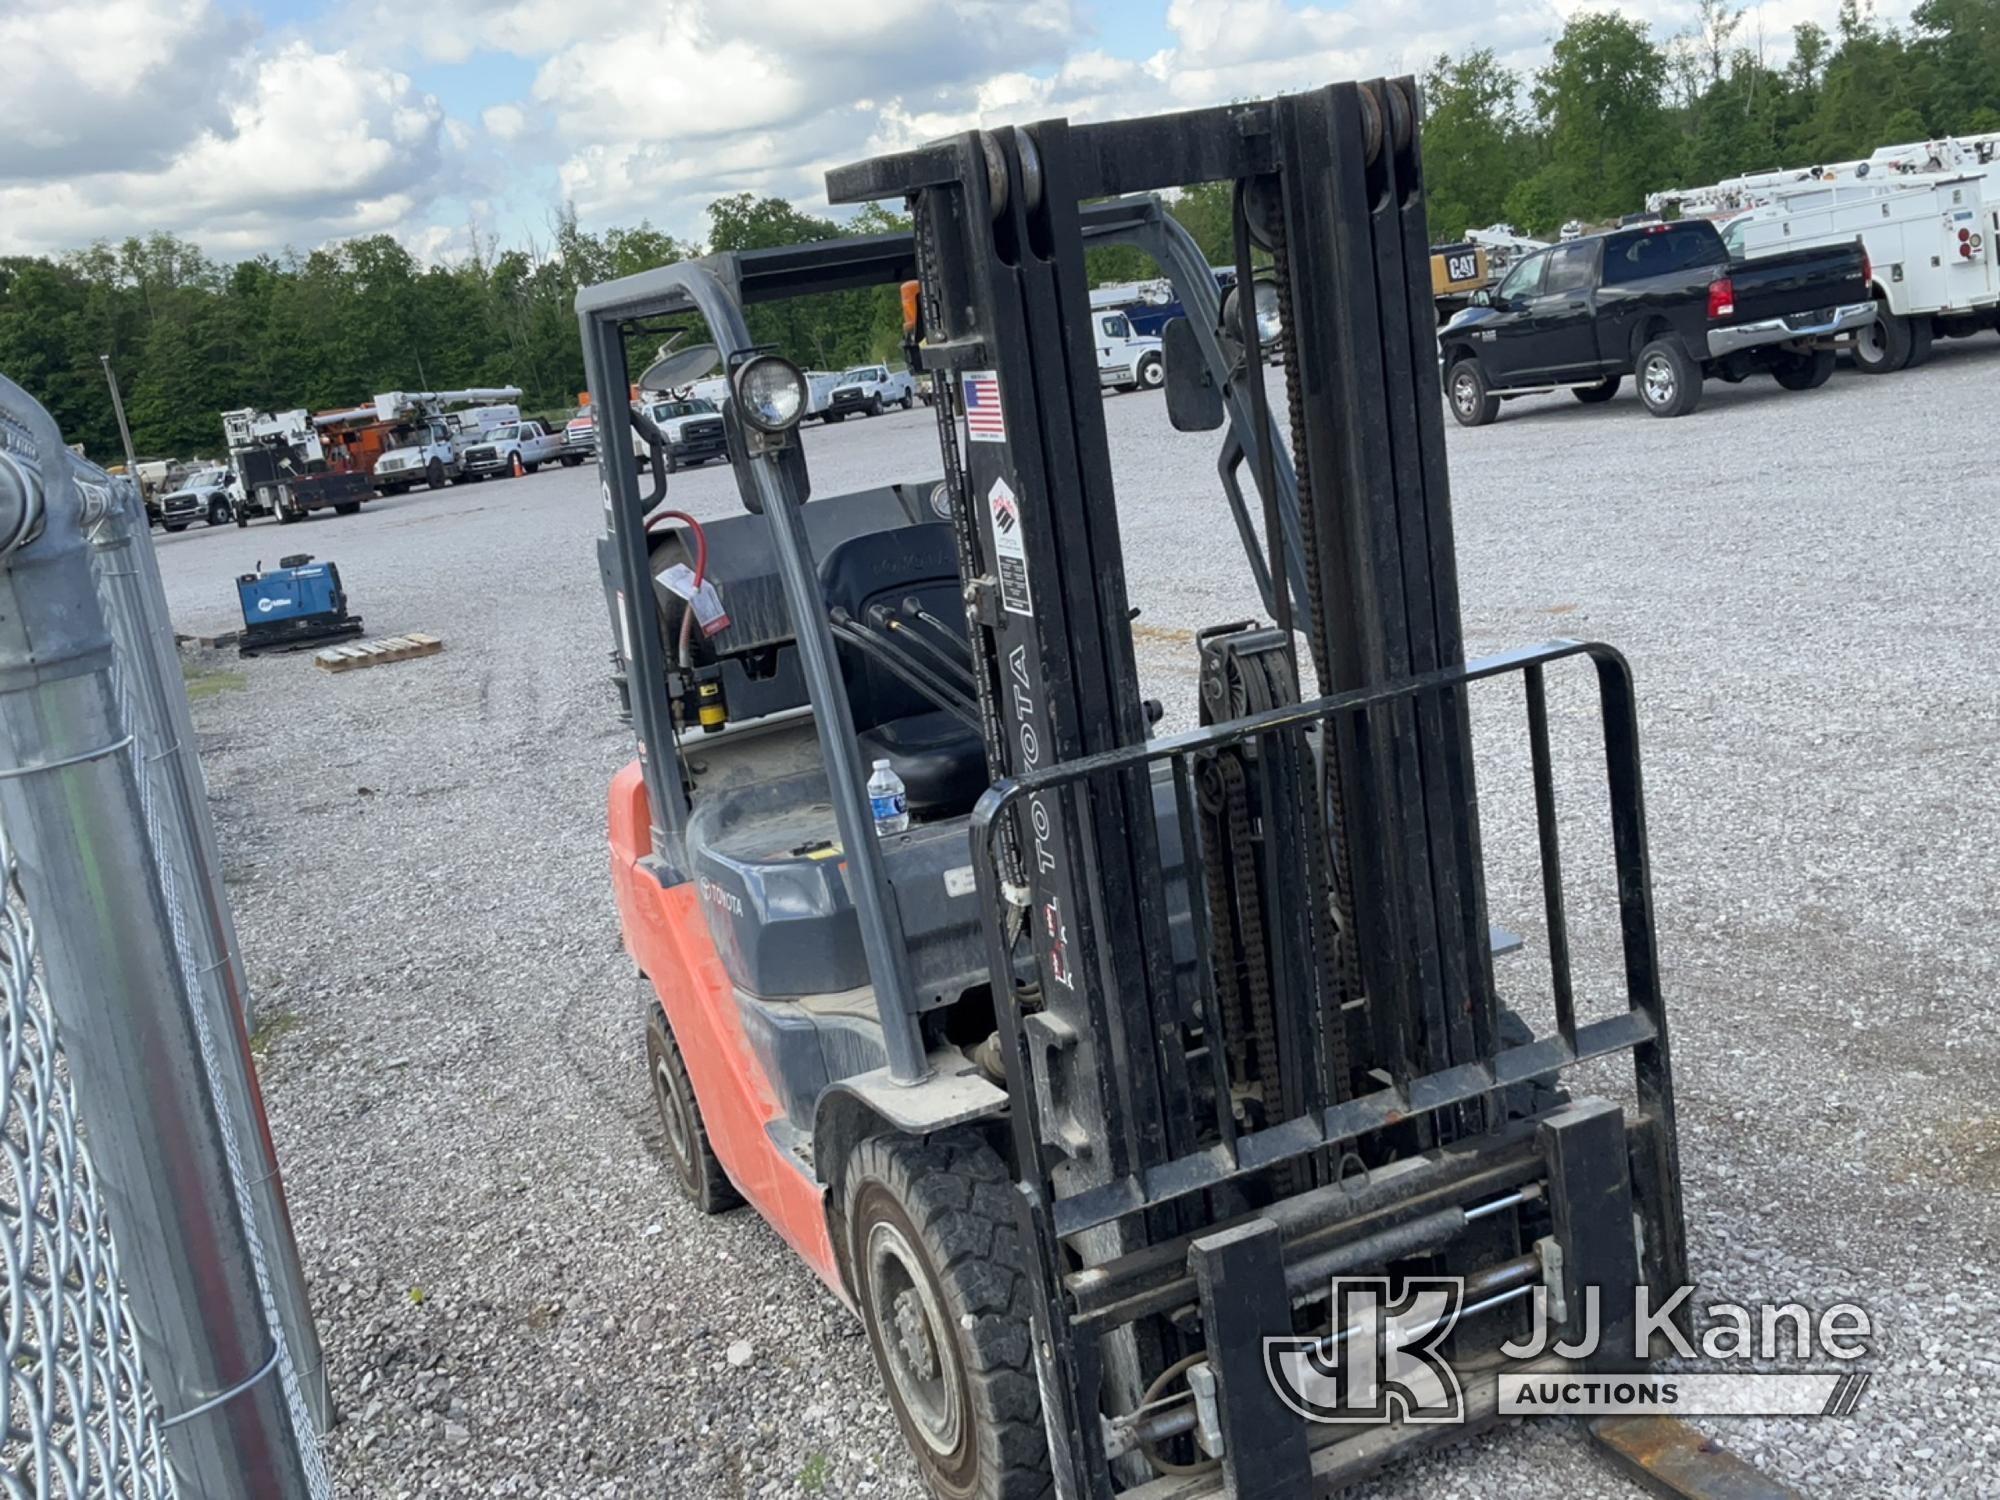 (Verona, KY) 2013 Toyota 8FGU25 Rubber Tired Forklift Runs, Moves & Operates) (BUYER MUST LOAD